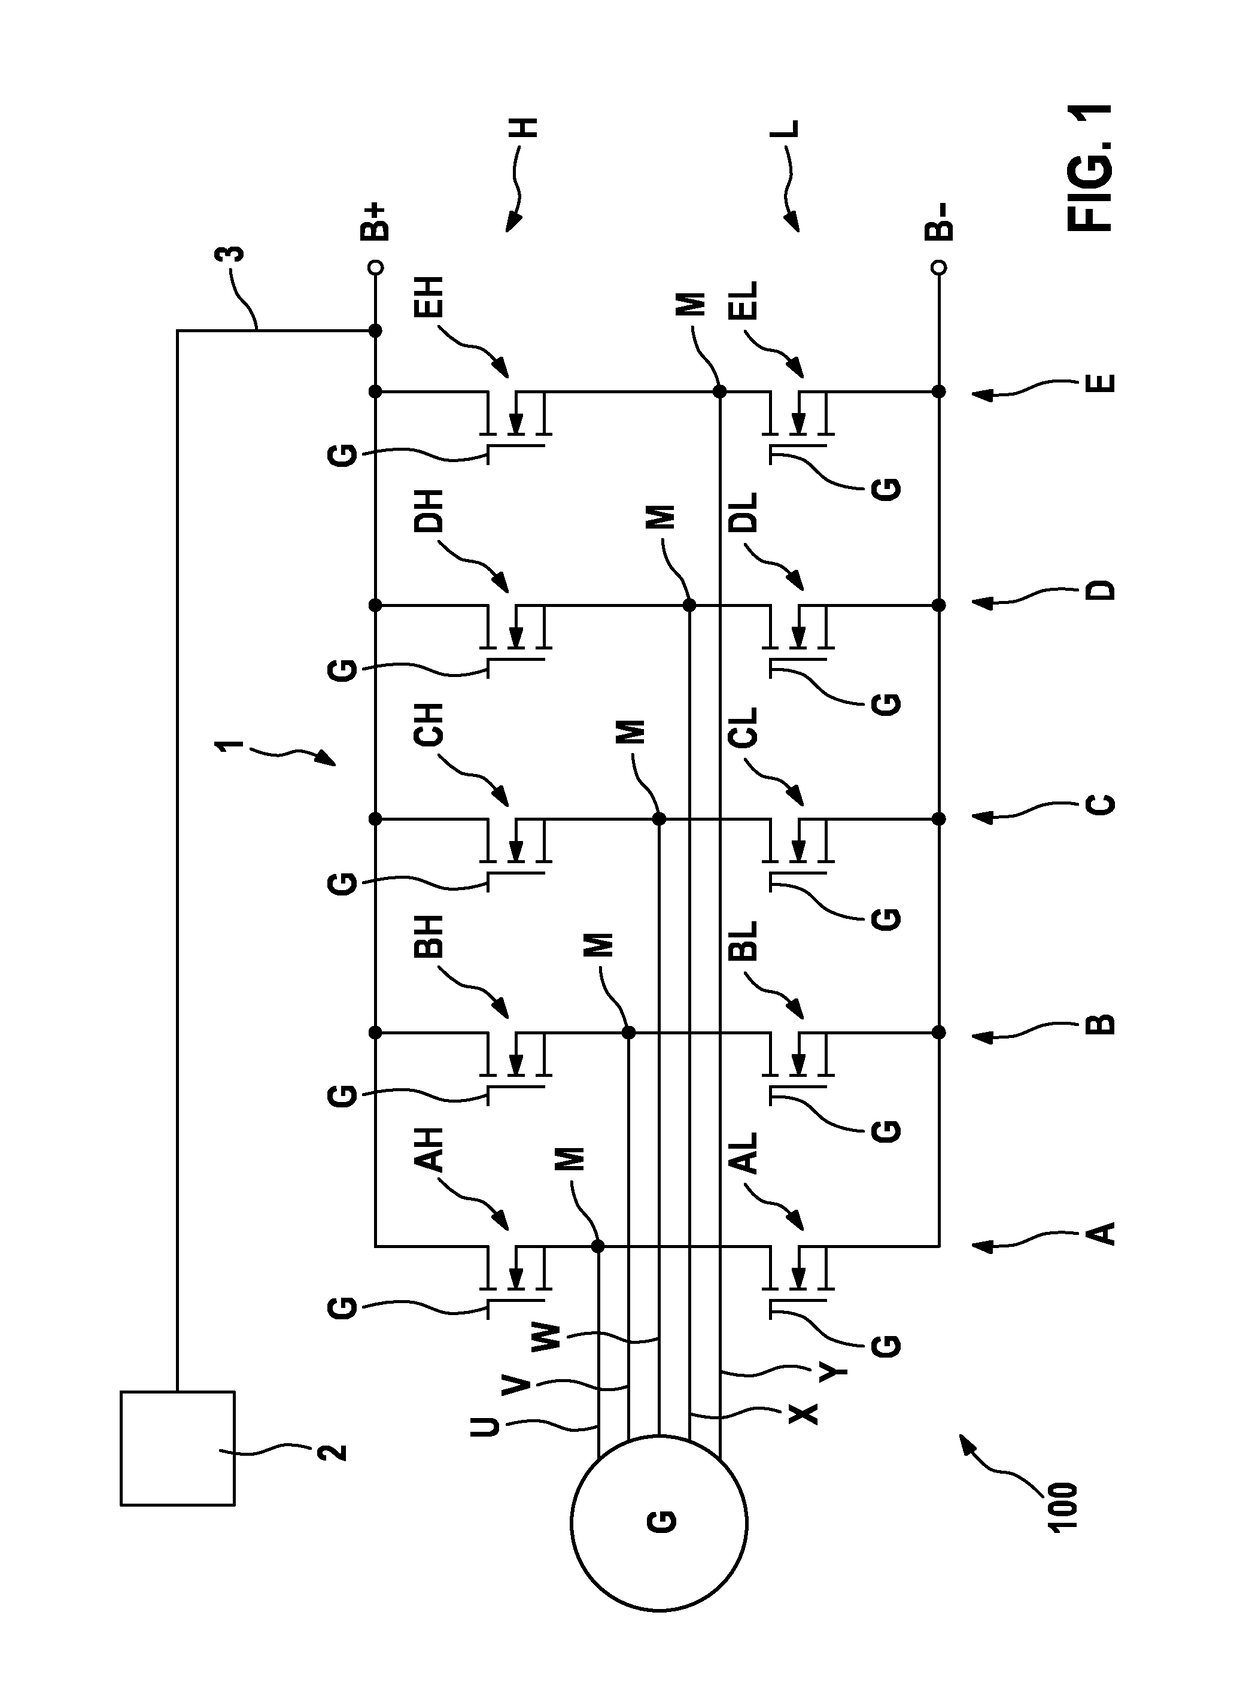 Overvoltage protection for a motor vehicle electrical system in the event of a load dump